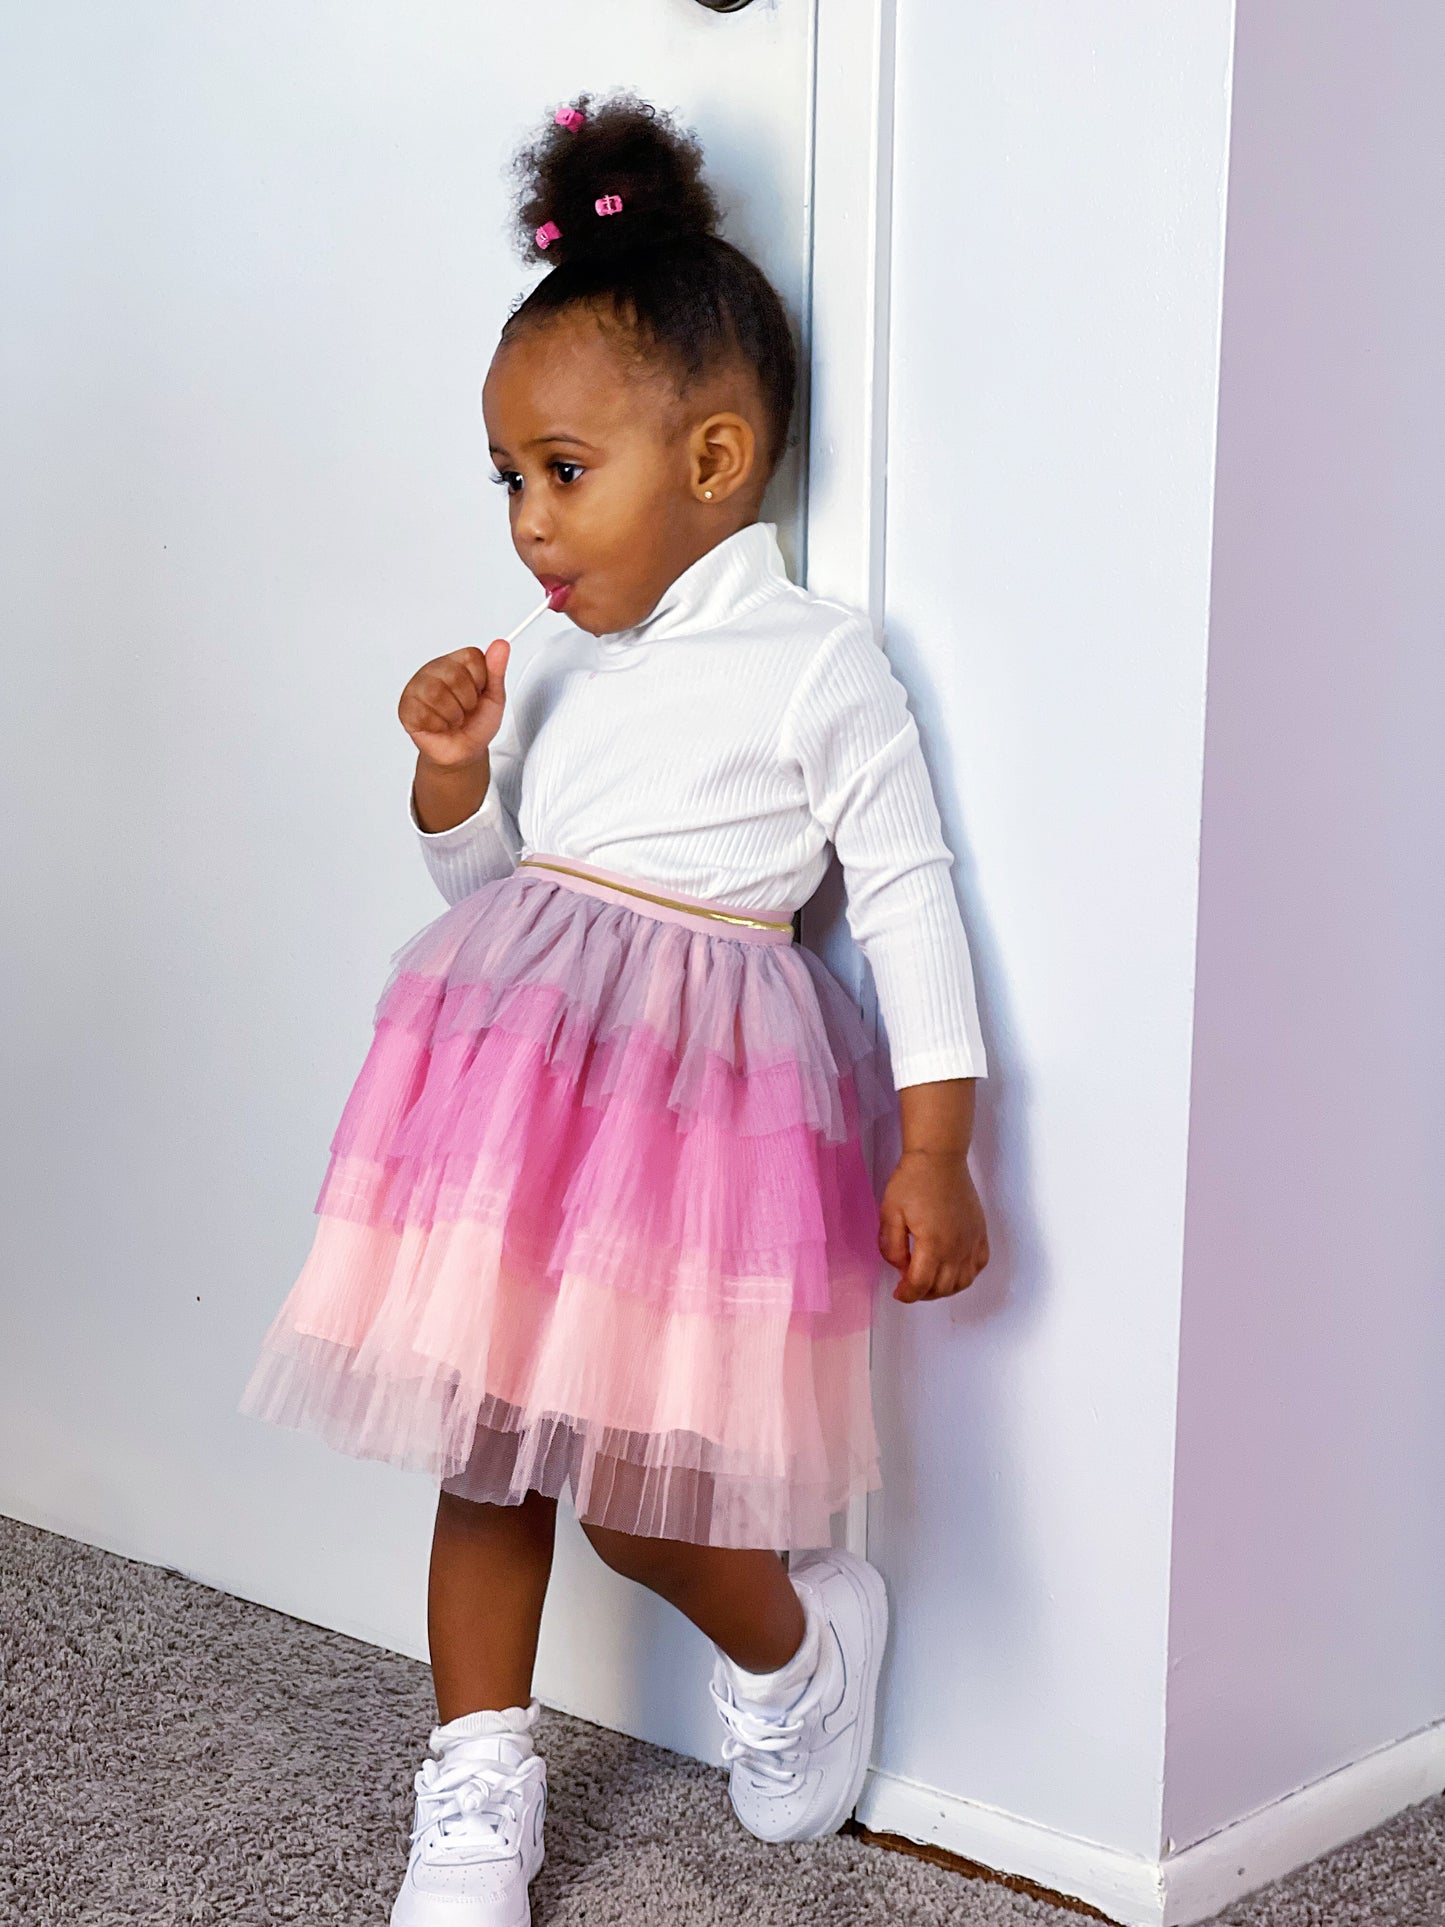 Cute Little Girl In Tutu Skirt Looking At The Camera